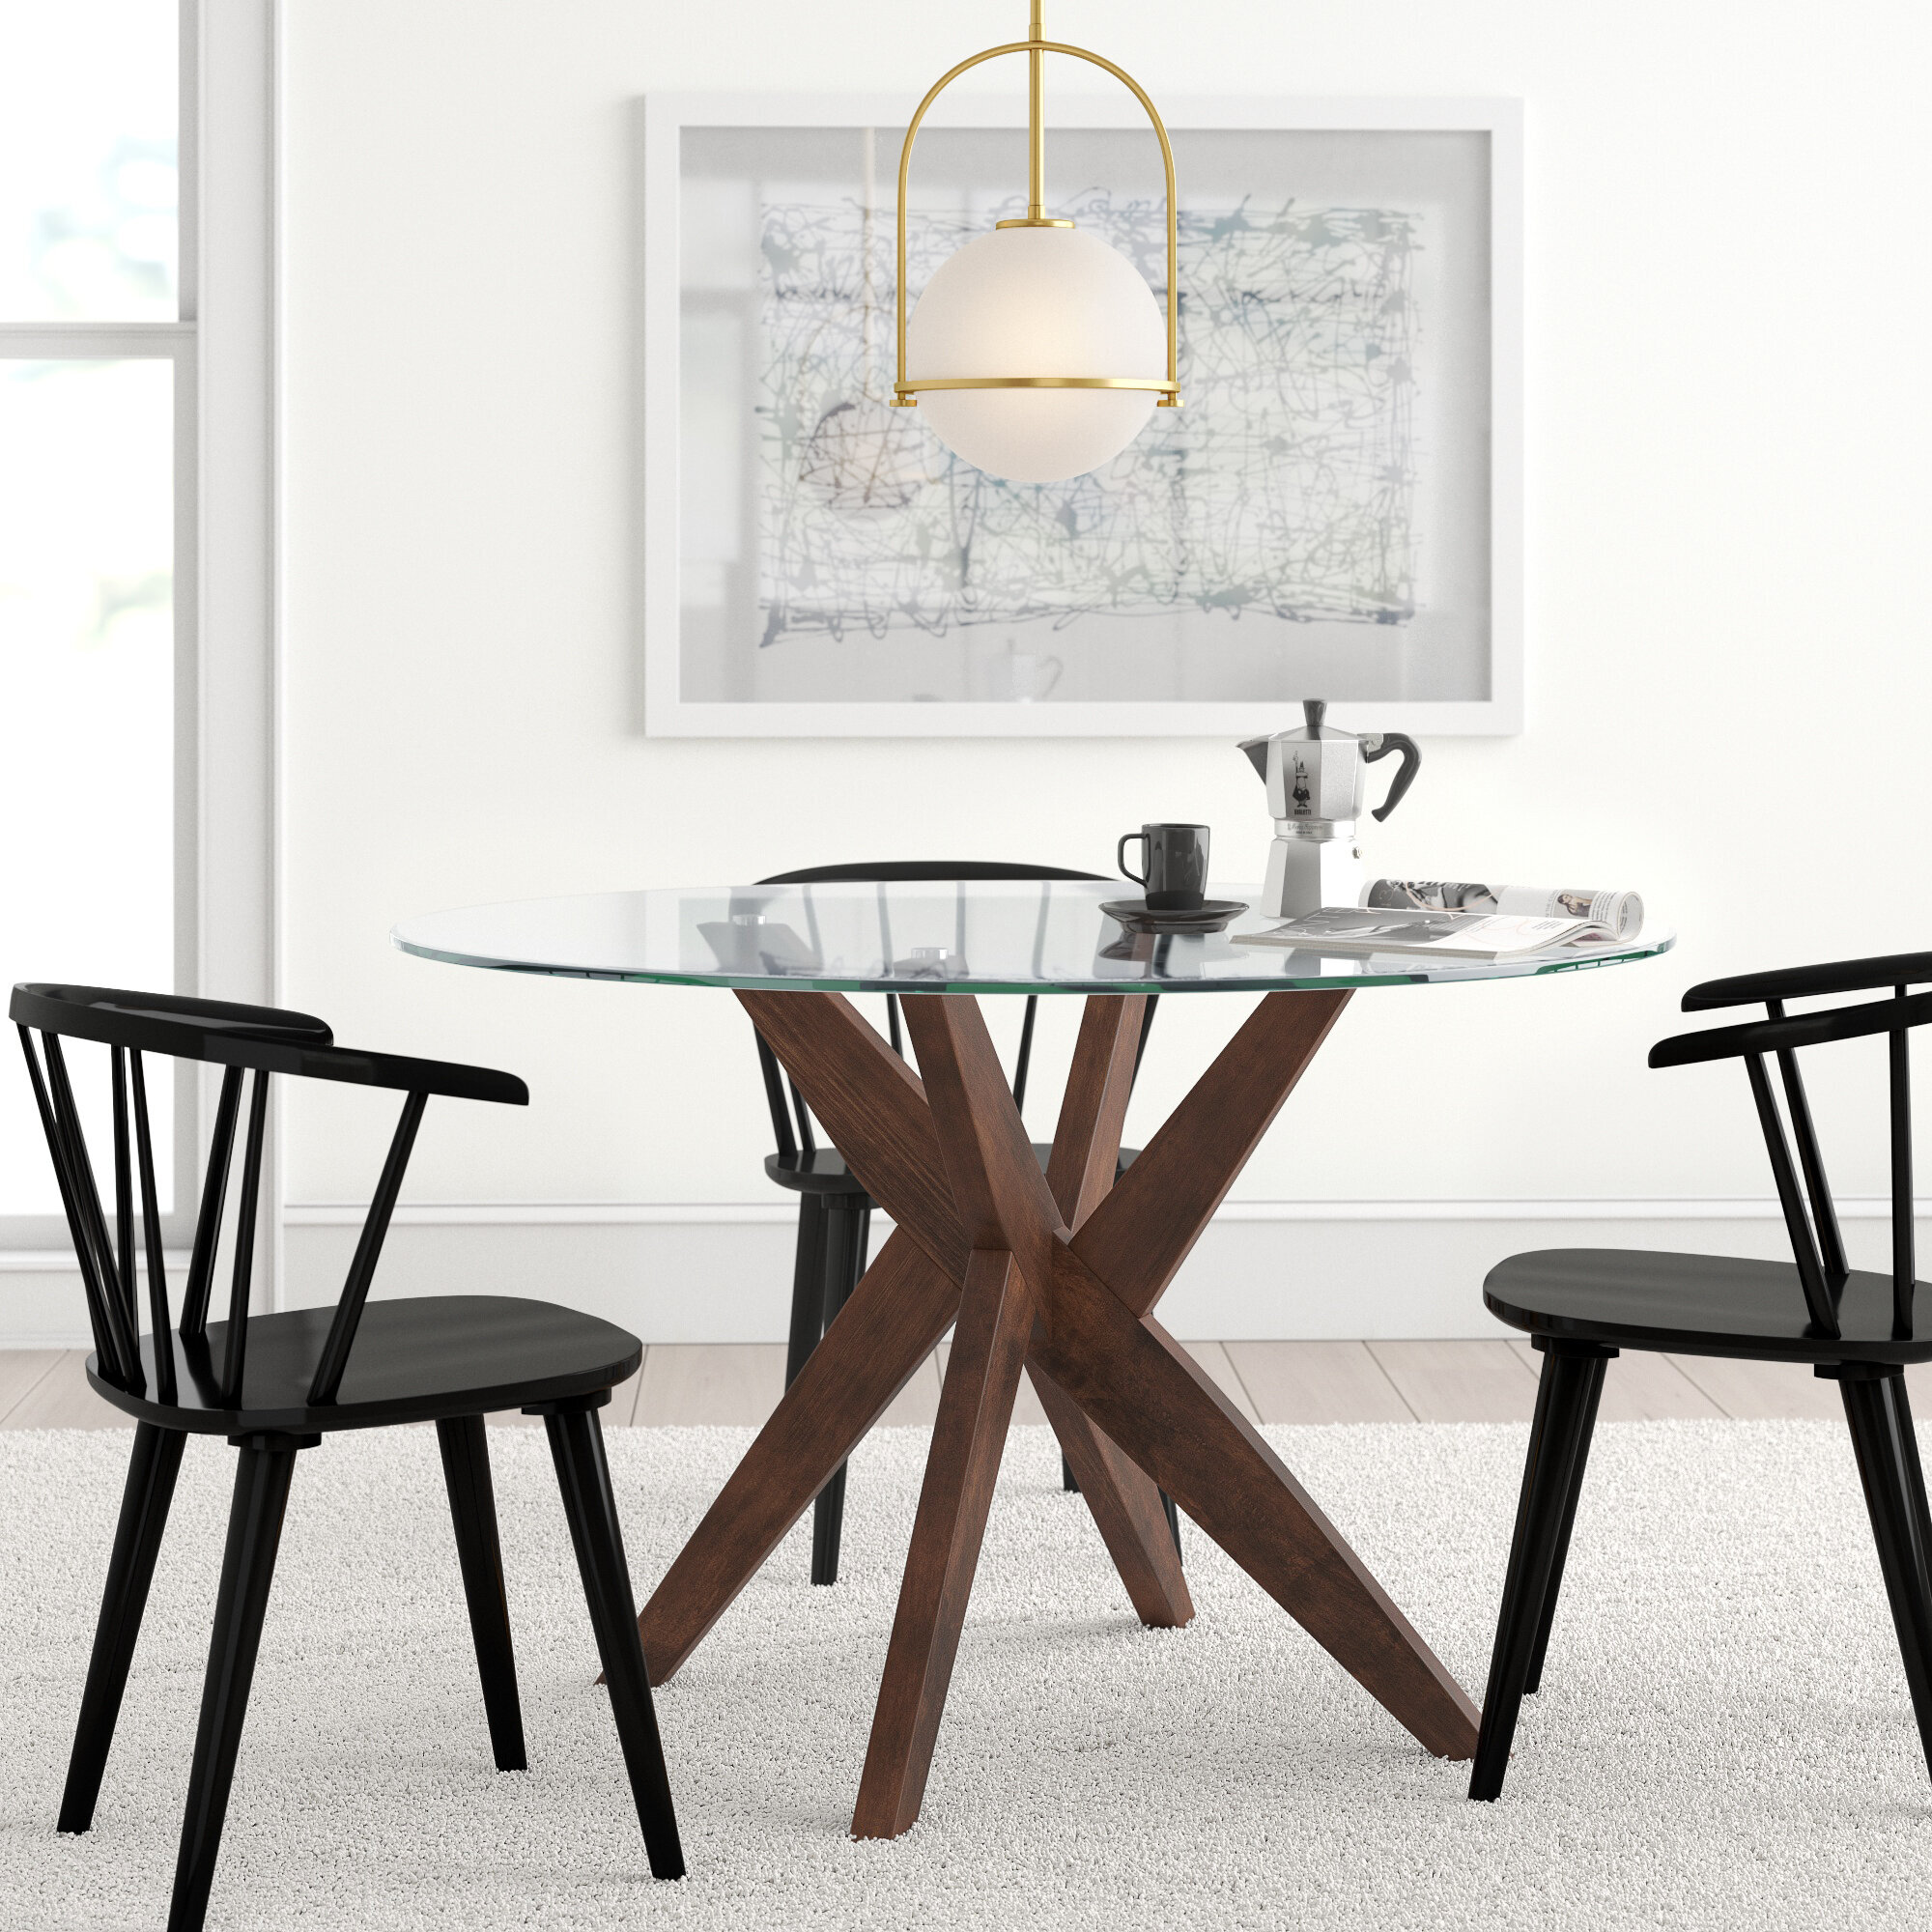 Tabor 48'' Pedestal Dining Table